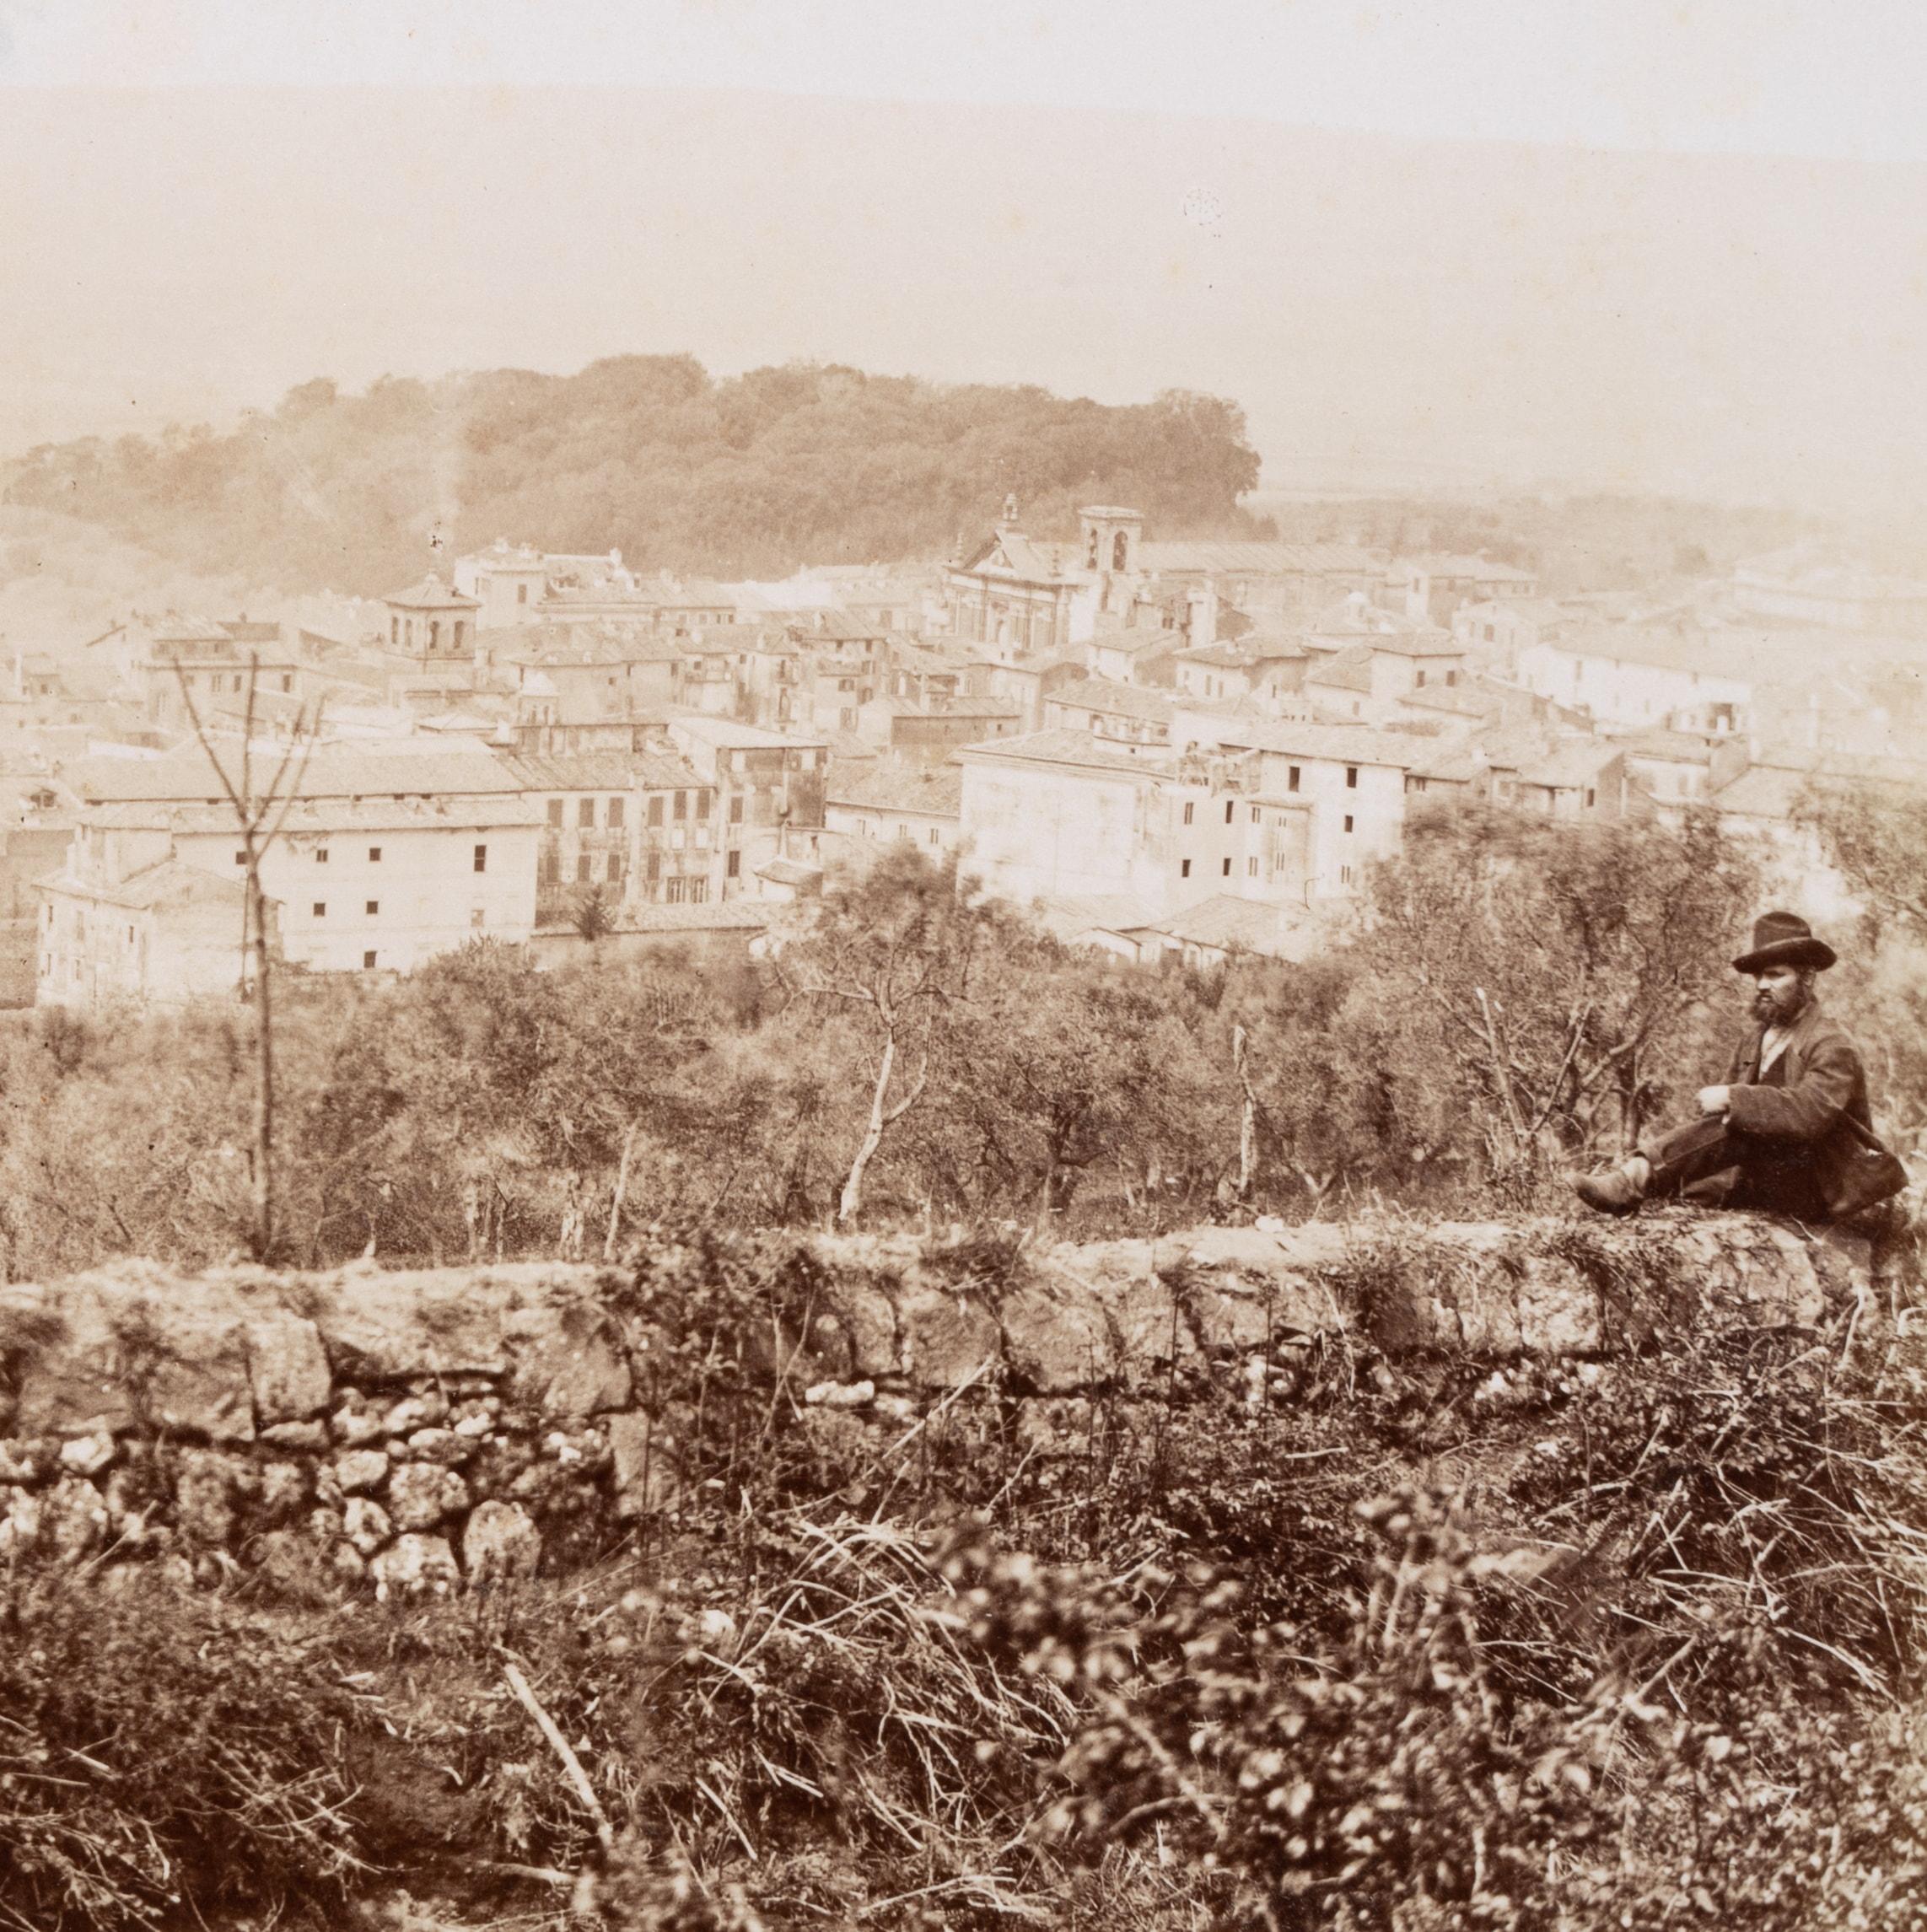 Domenico Anderson (1854 Rom - 1938 ibid.) Circle: View of the roofs of the town of Albano with wanderer sitting on a wall in the front of the picture, c. 1880, albumen paper print

Technique: albumen paper print, mounted on Cardboard

Inscription: